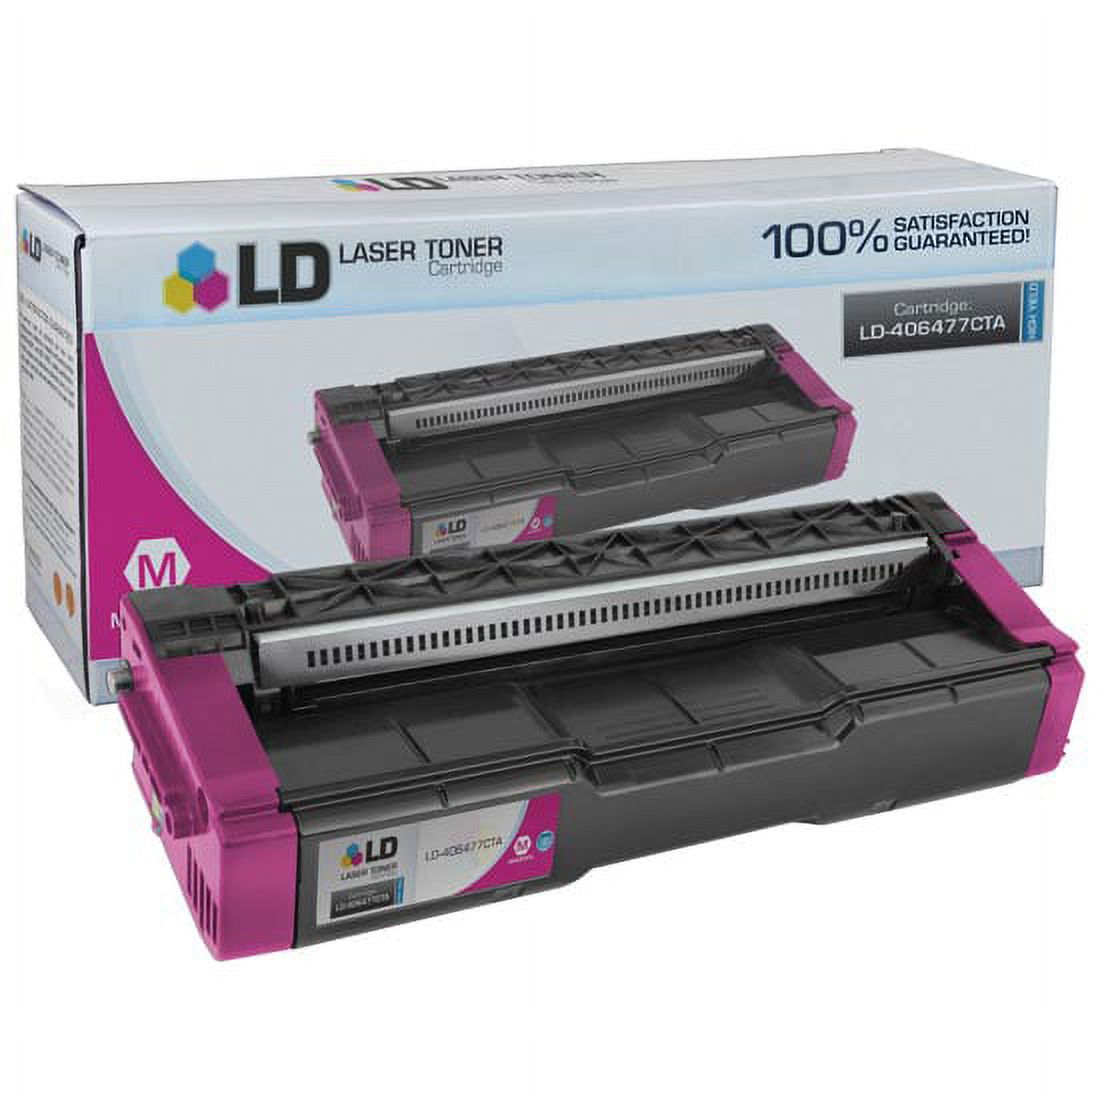 LD © Compatible Replacement for Ricoh 406477 High Yield Magenta Laser Toner Cartridge for use in Ricoh Aficio SP C231N, SP C232DN, SP C242DN, SP C242SF, and SP C320DN Printers - image 1 of 2